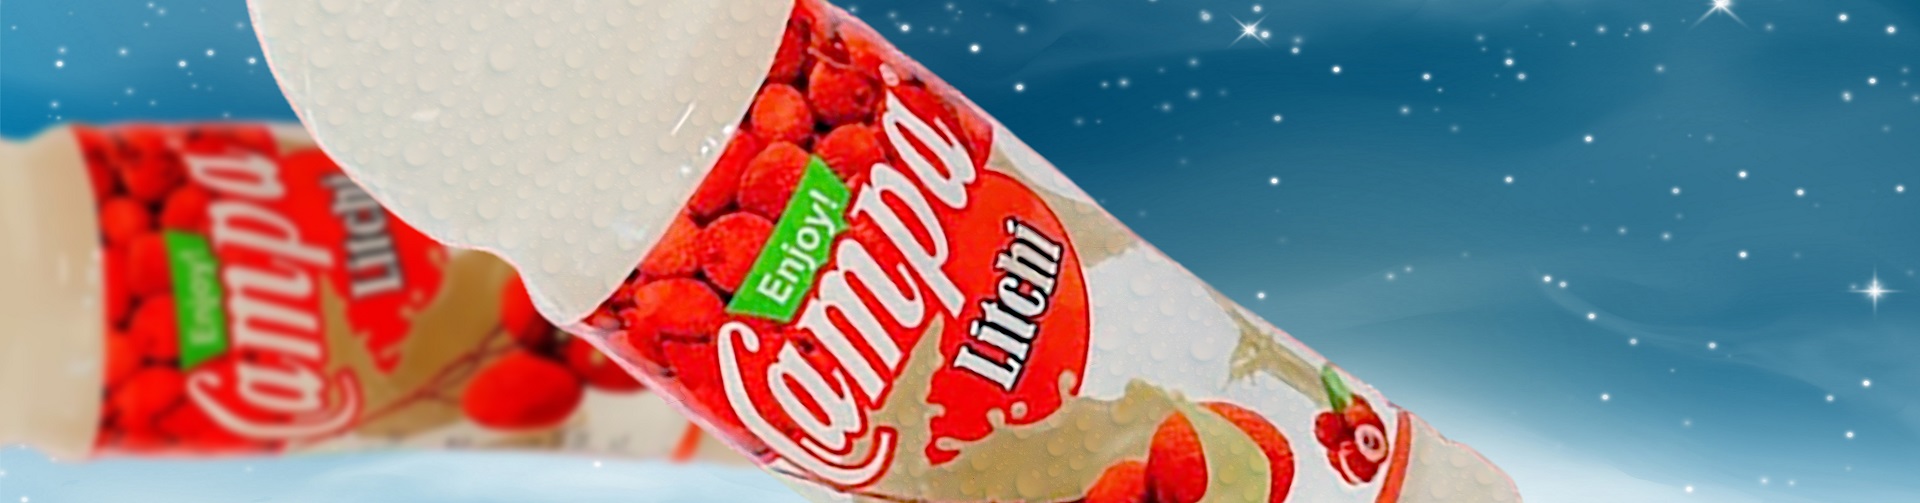 Banner displaying Campa litchi product bottle